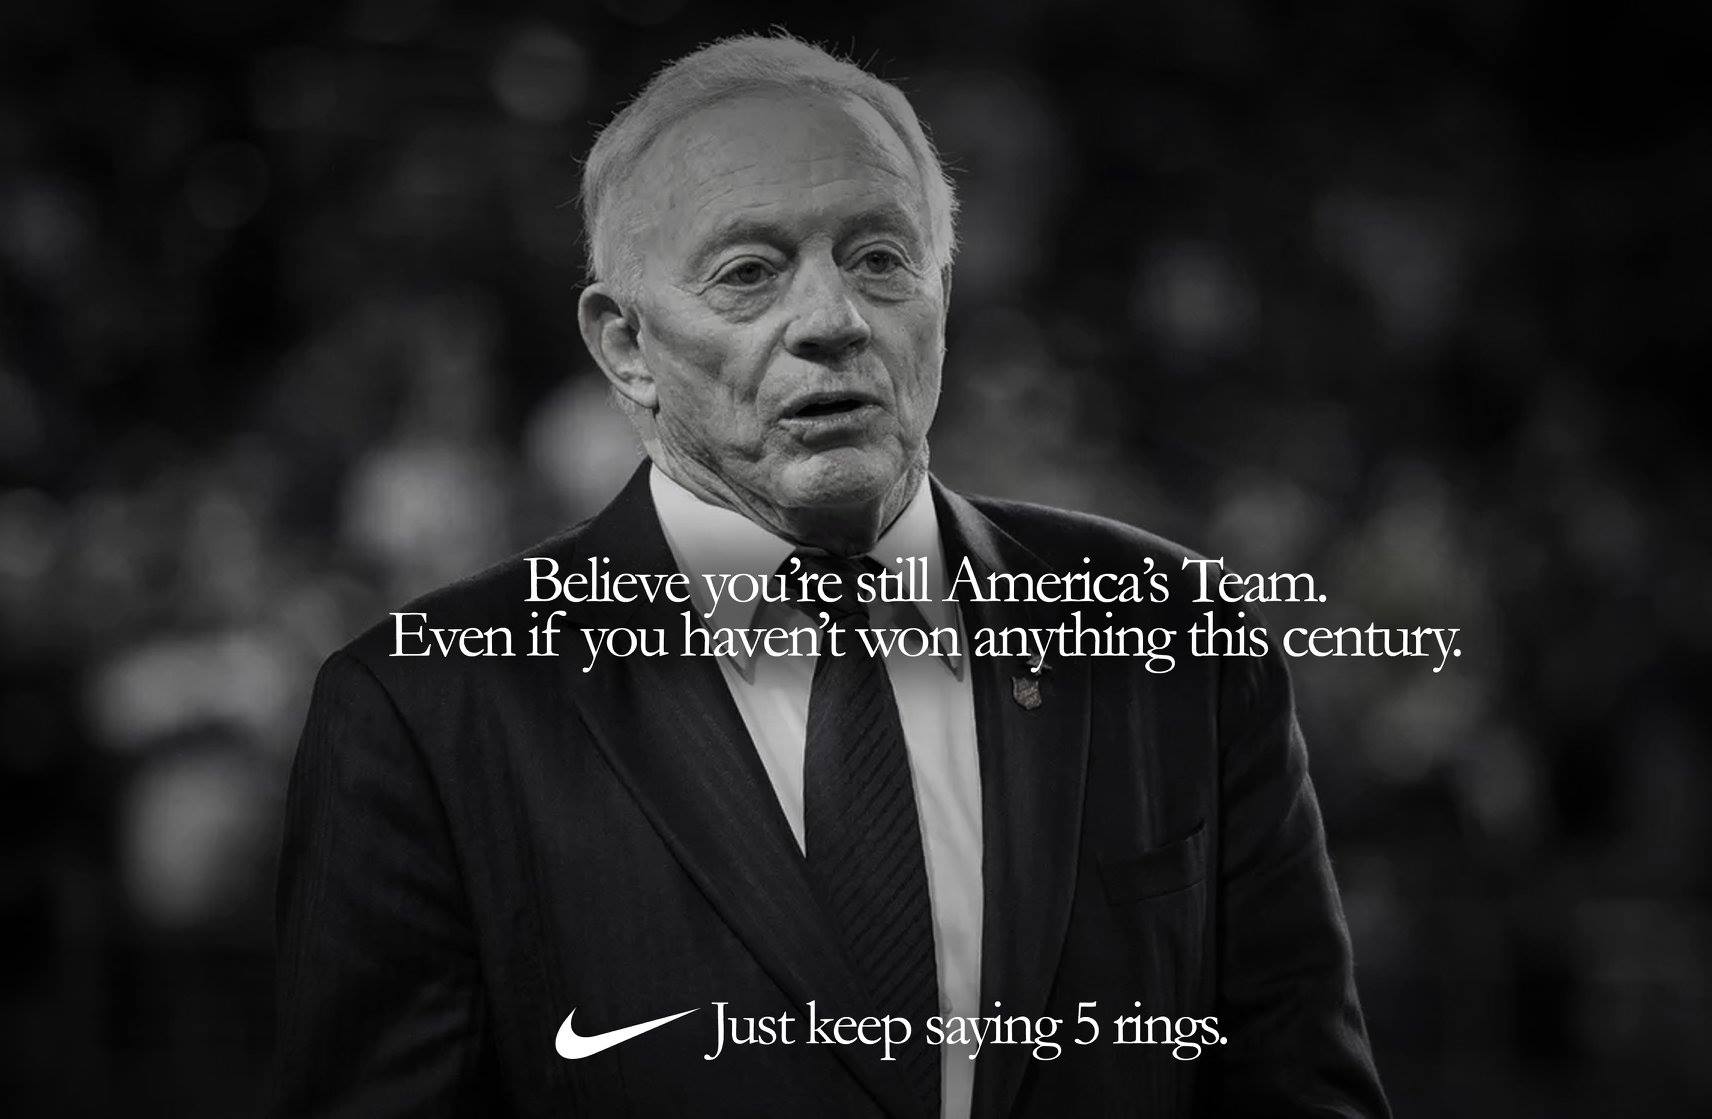 Cowboy's owner Jimmy Johnson in a Nike ad spoof with the text 'Believe you're still America's team. Even if you haven't won anything this century'